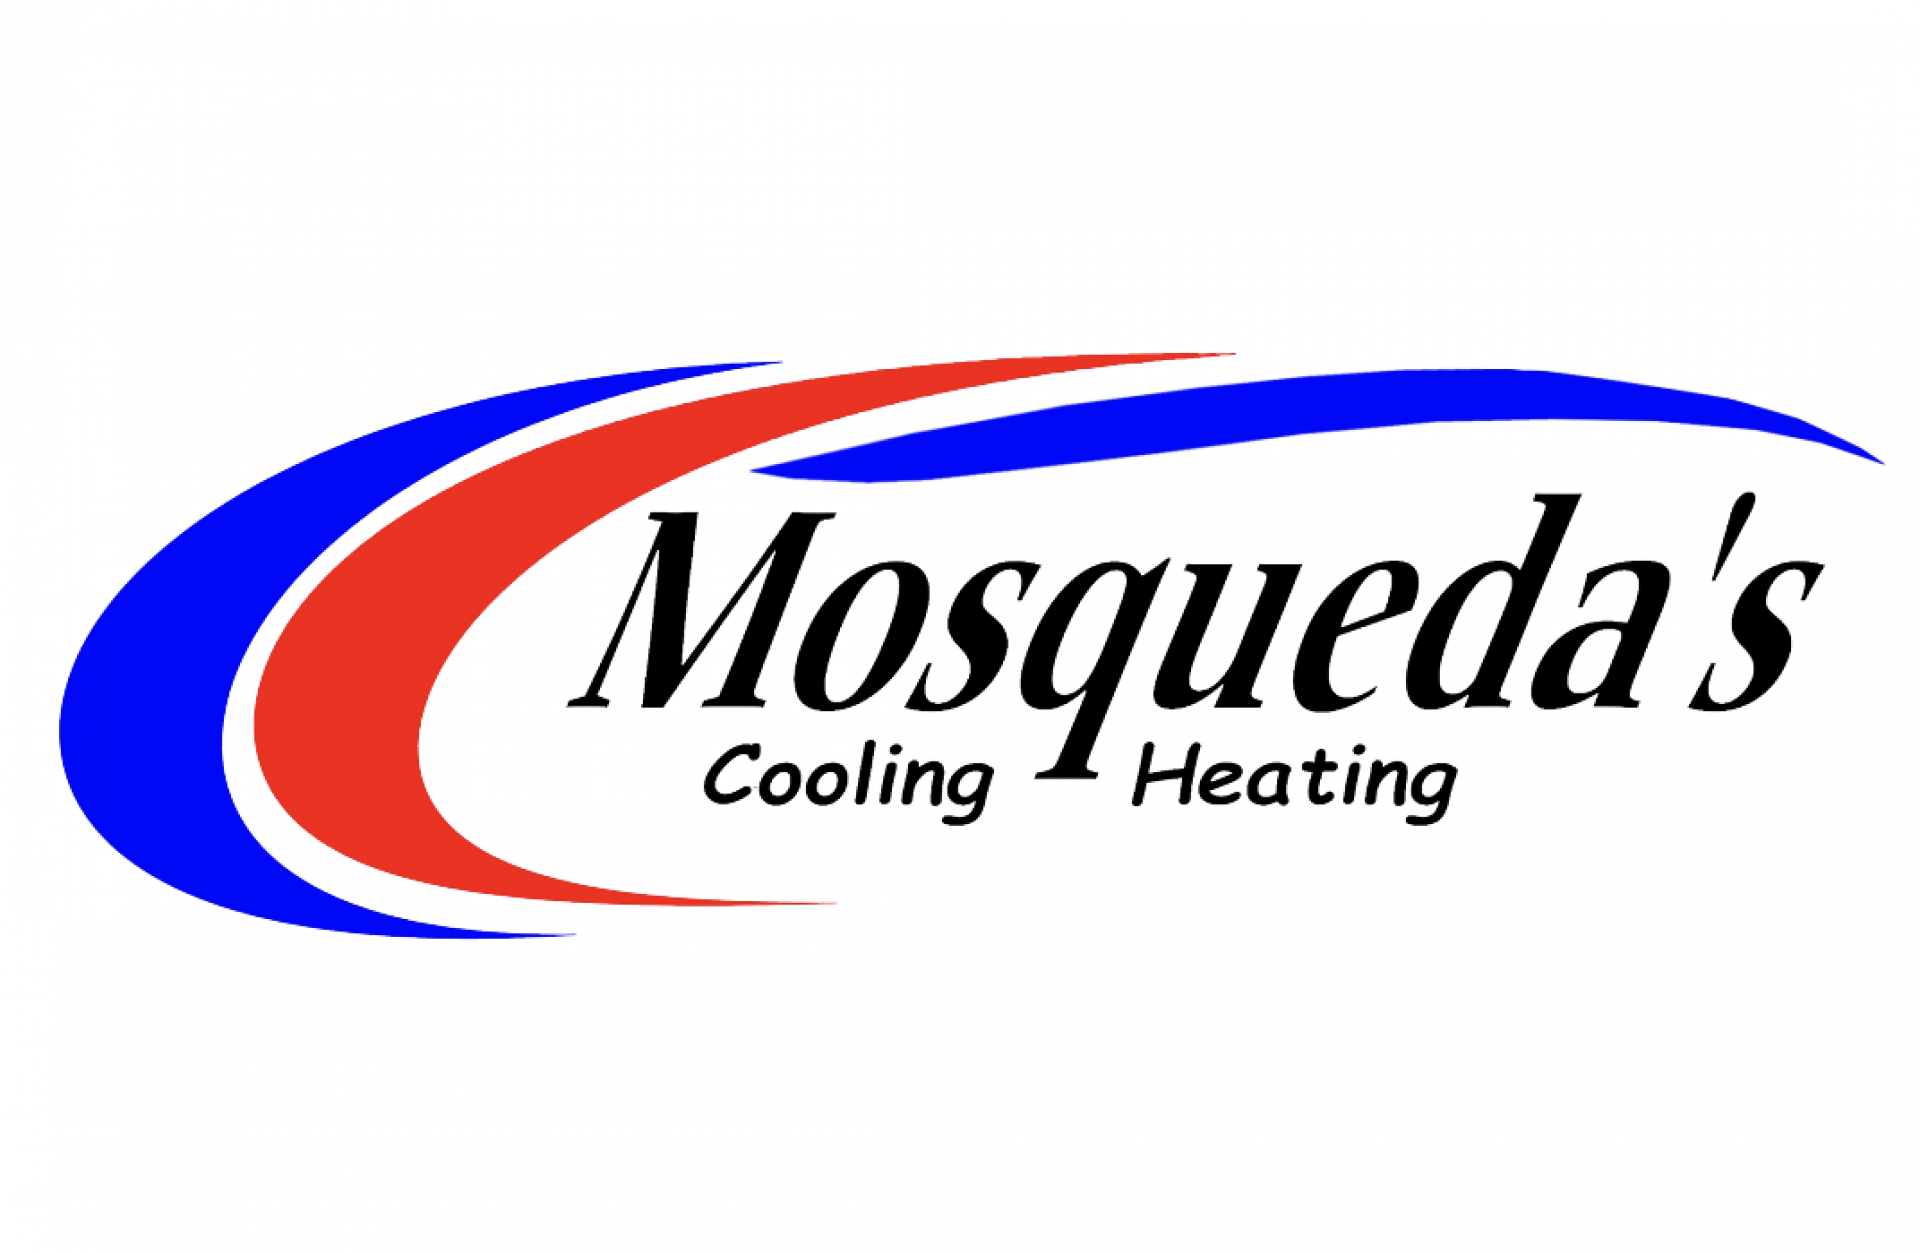 Mosqueda's Cooling and Heating company logo